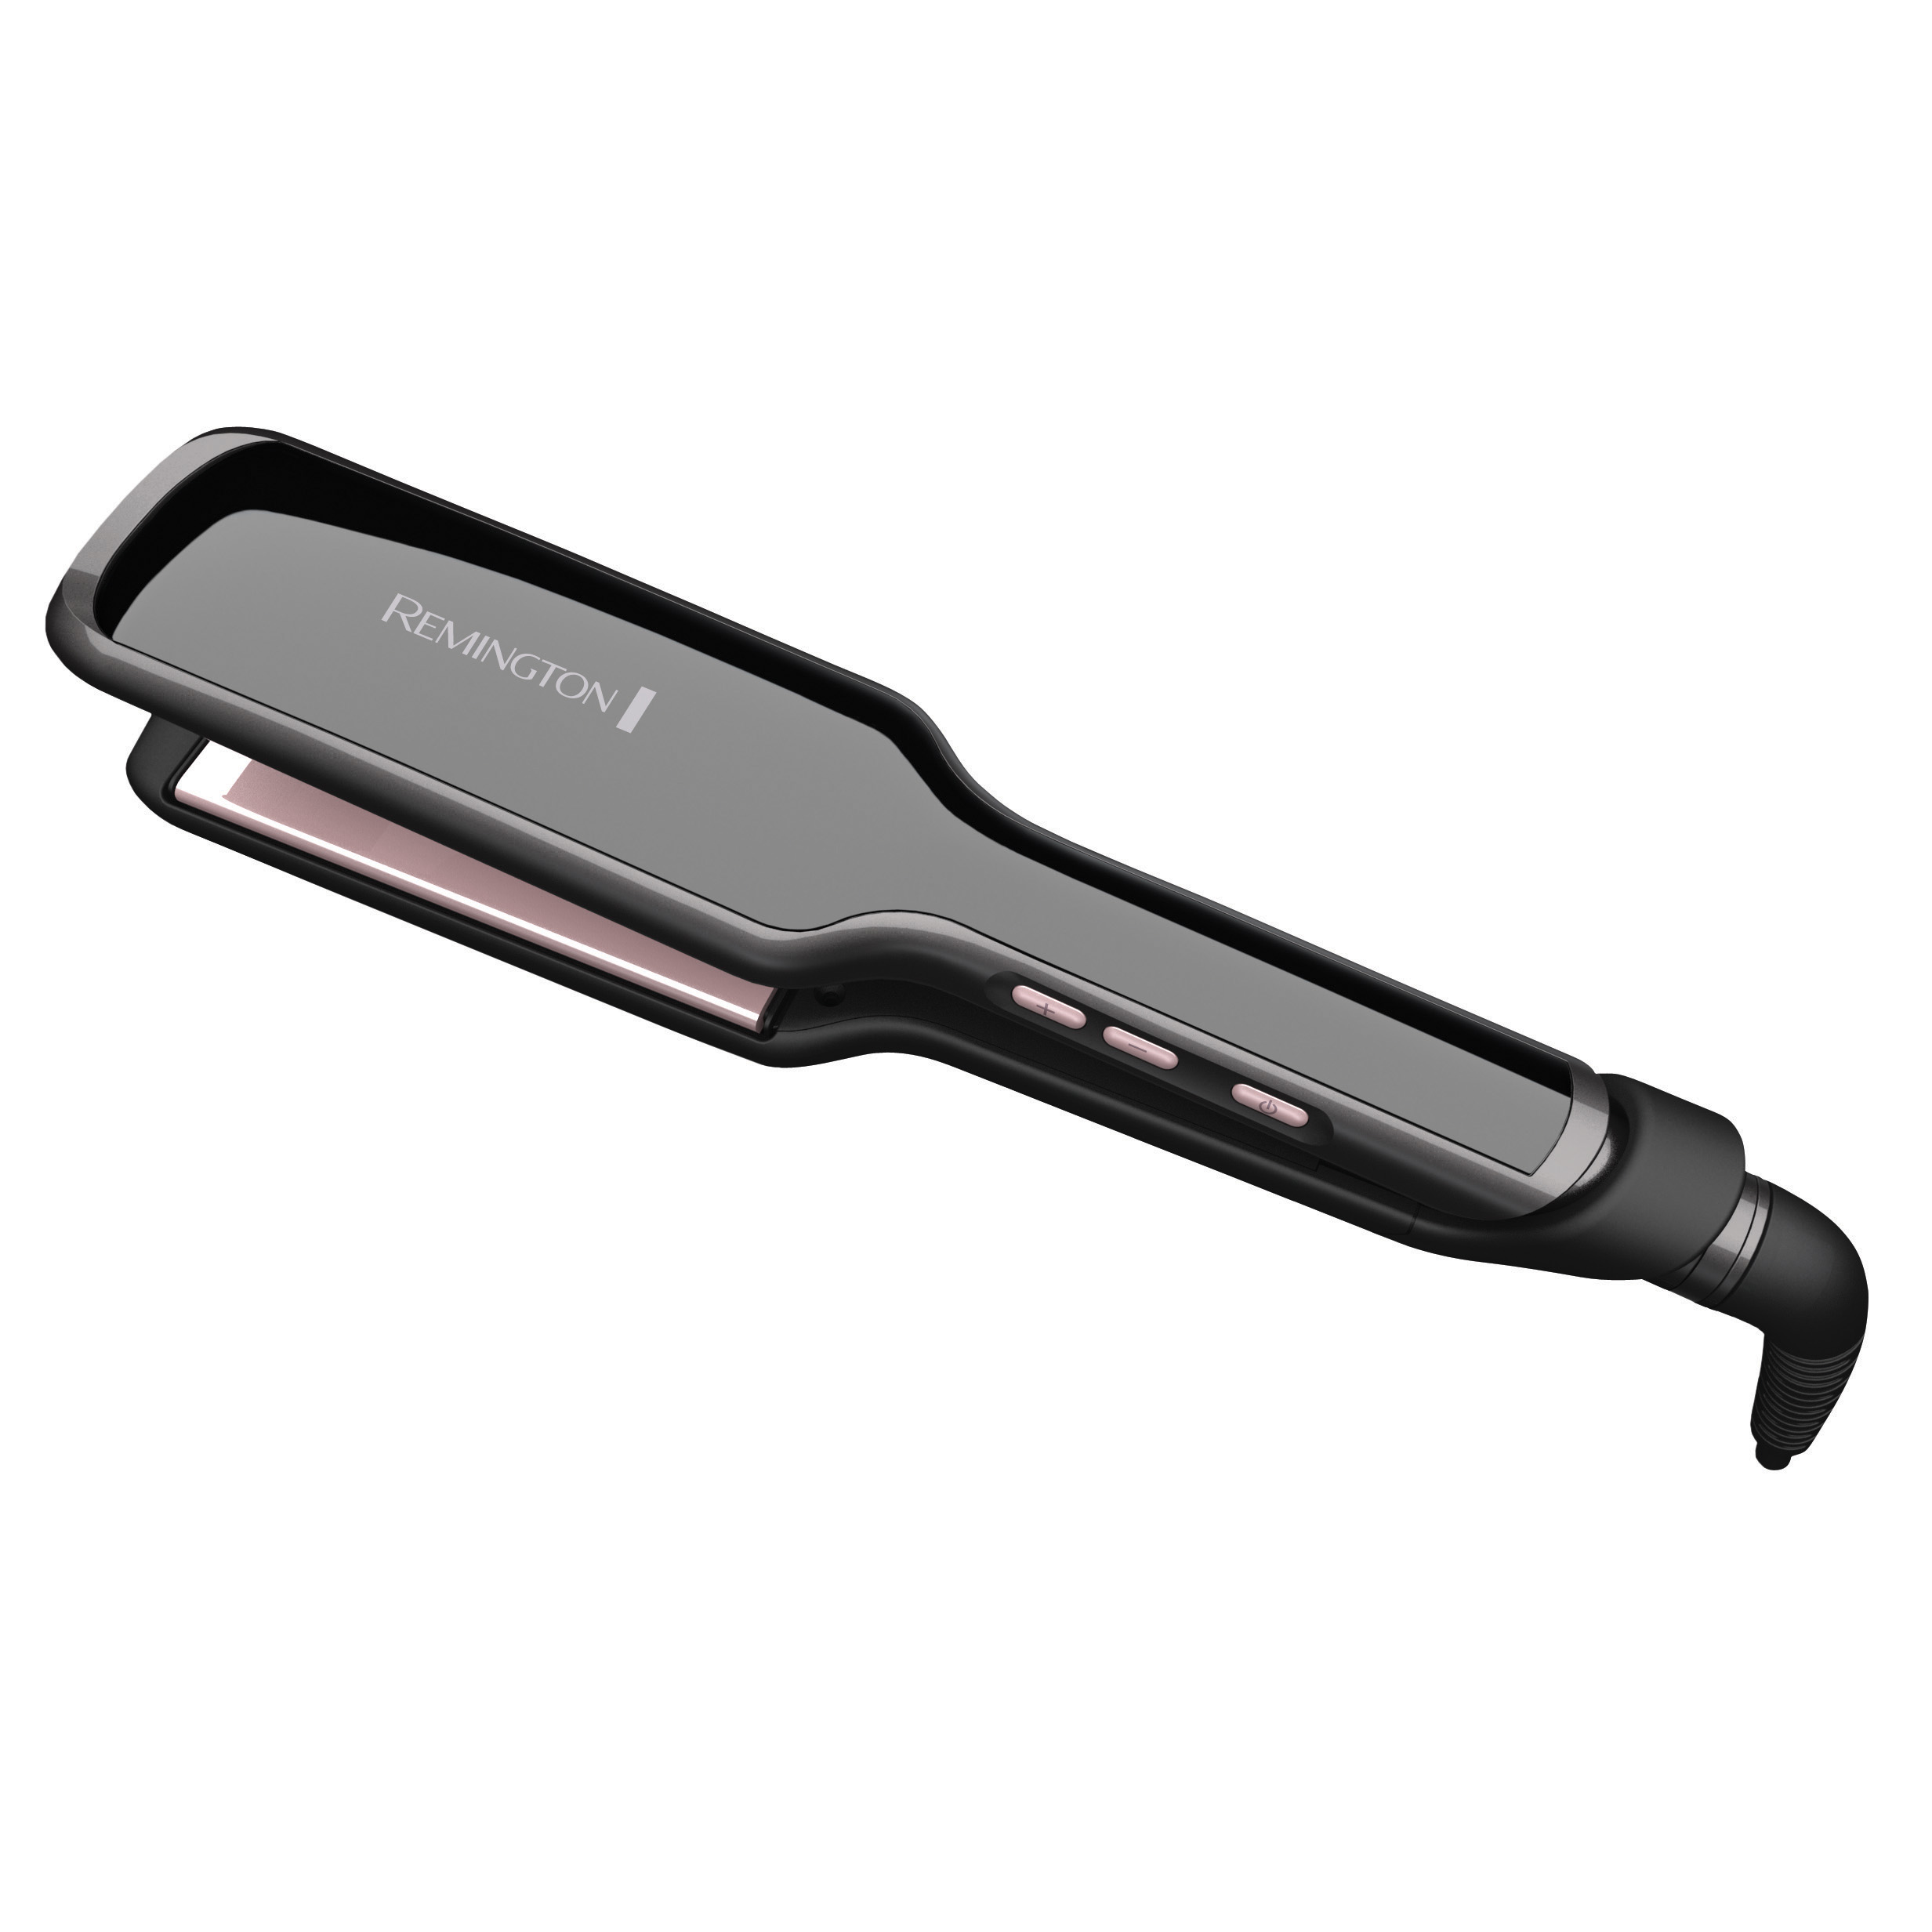 Remington Pro Soft Touch Finish and Digital Controls Professional 2" Pearl Ceramic Flat Iron Hair Straightener, Black - image 1 of 15